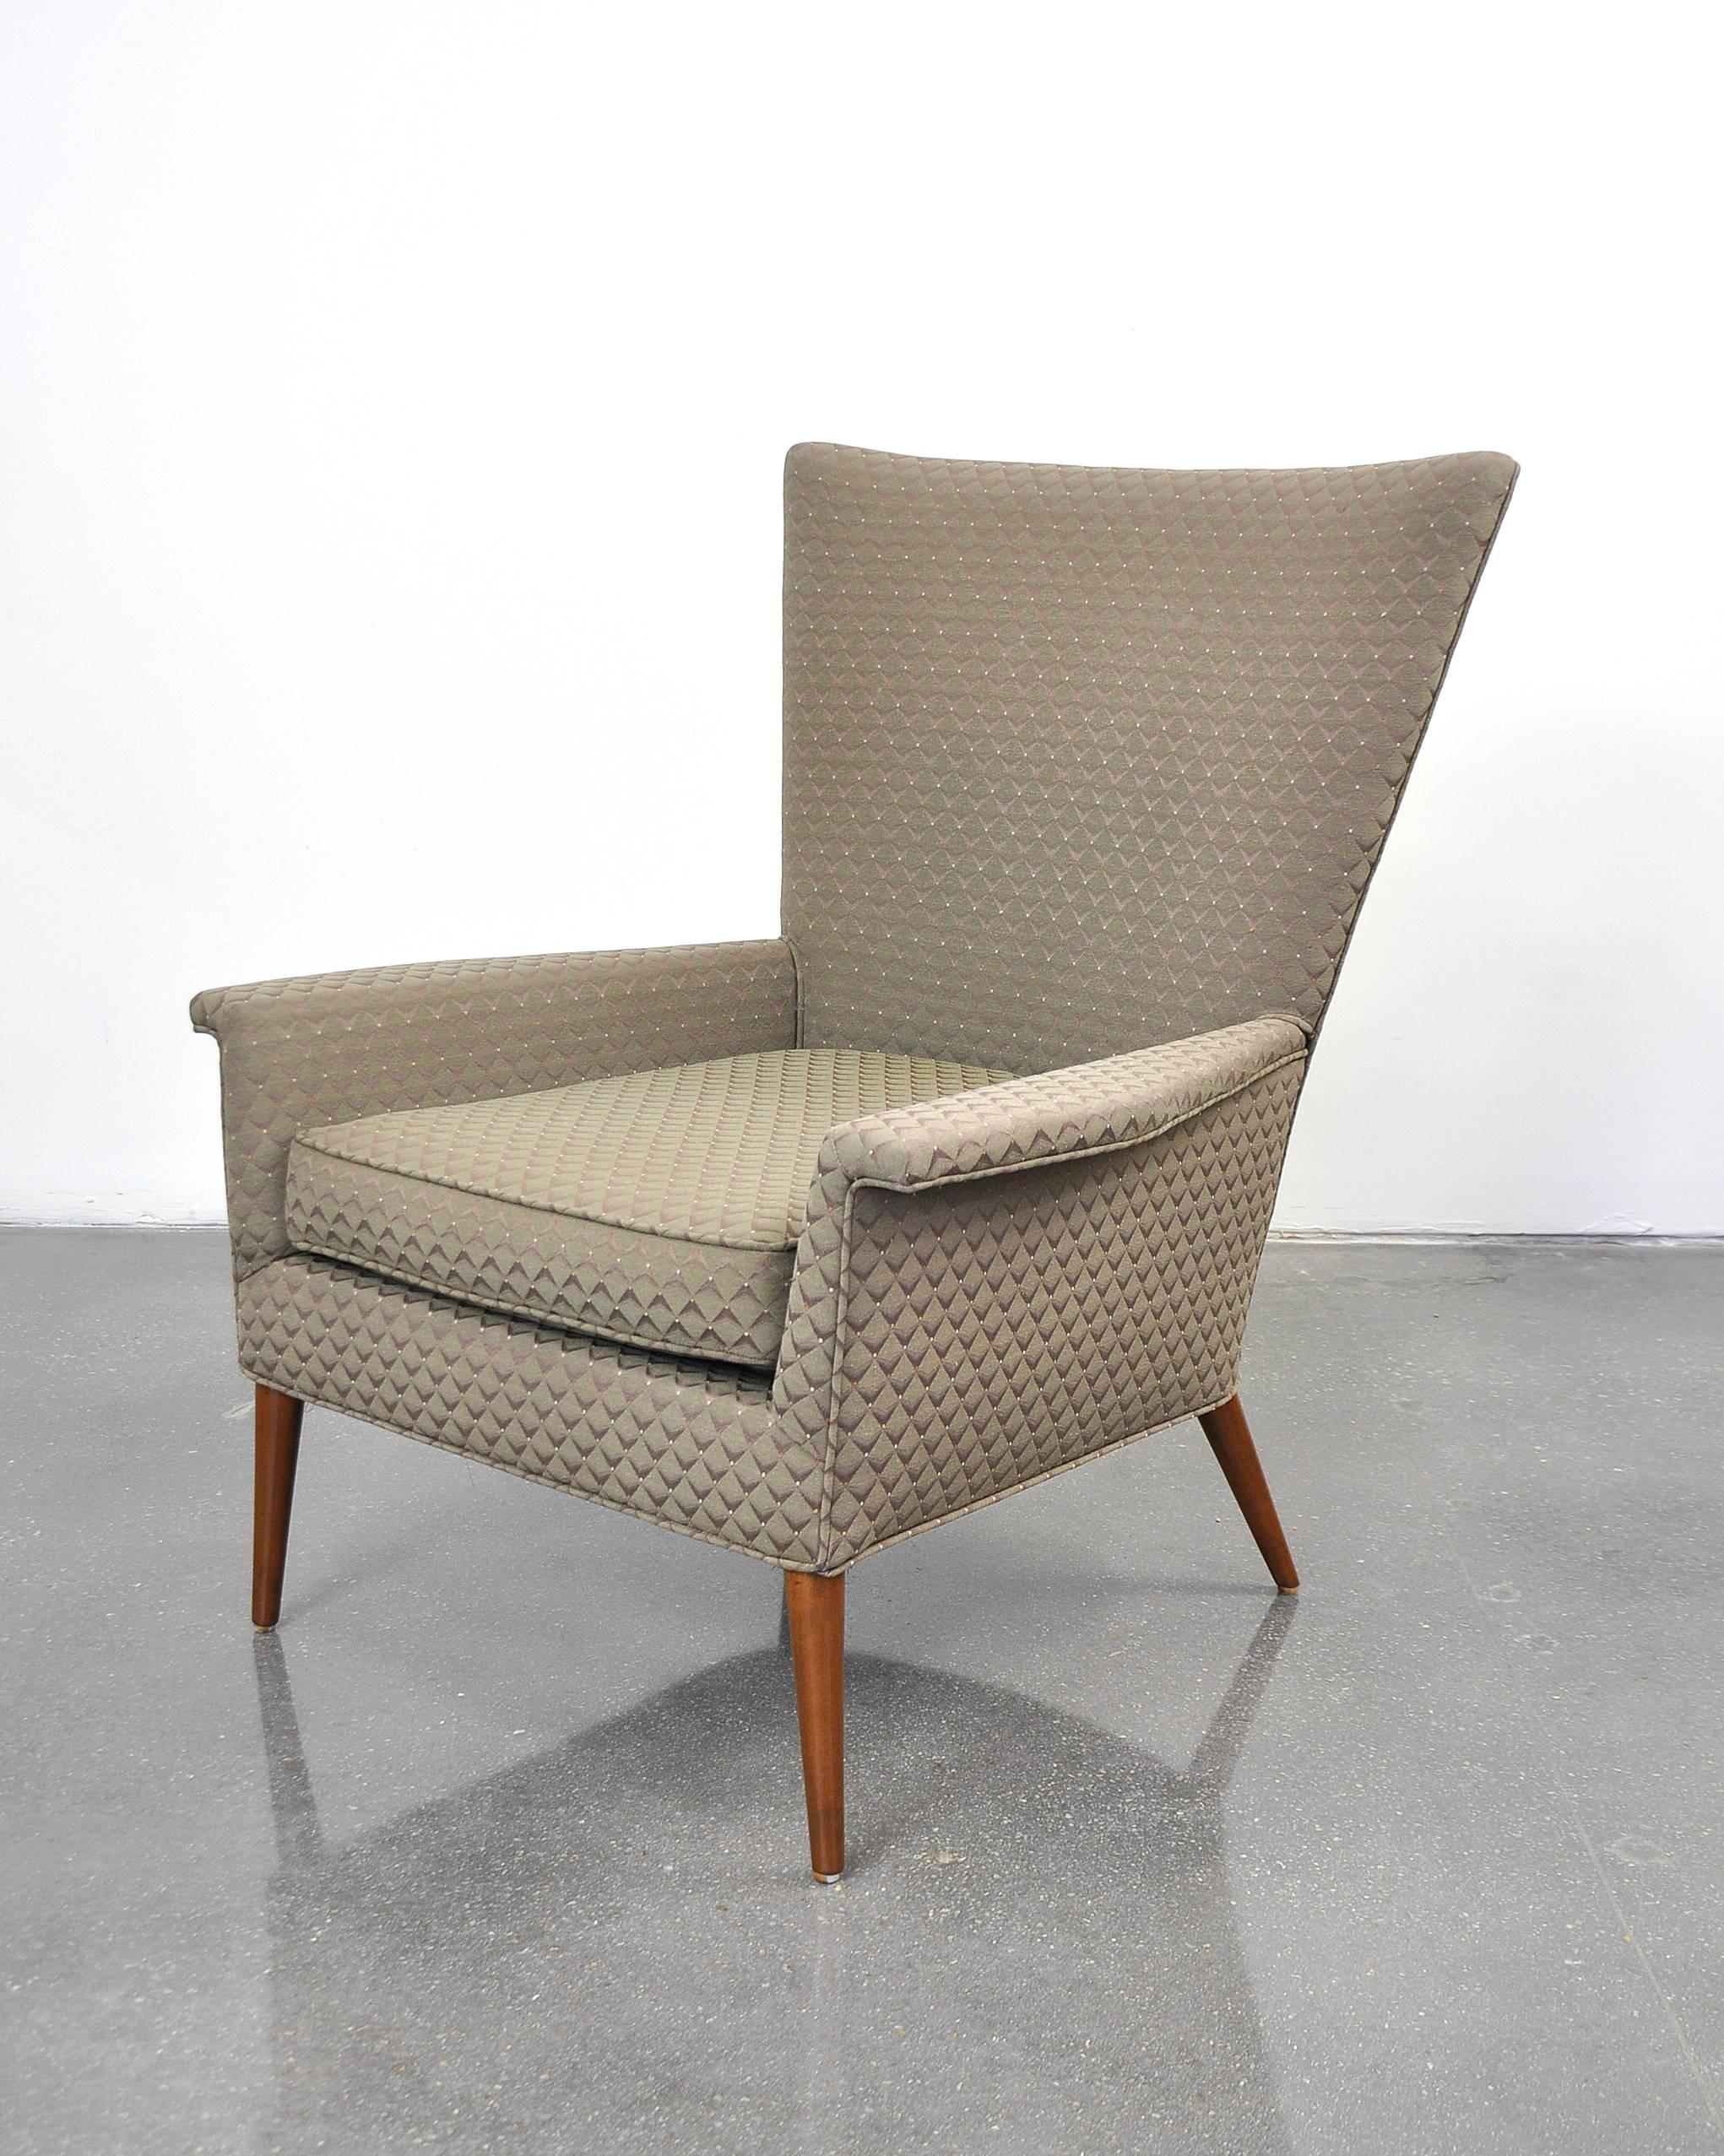 Rare Mid-Century Modern high back lounge armchair designed by Paul McCobb for the Planner Group line and first manufactured by Custom Craft in 1950. The armchair features a winged highback and sleek, splayed walnut legs. Retains original label.